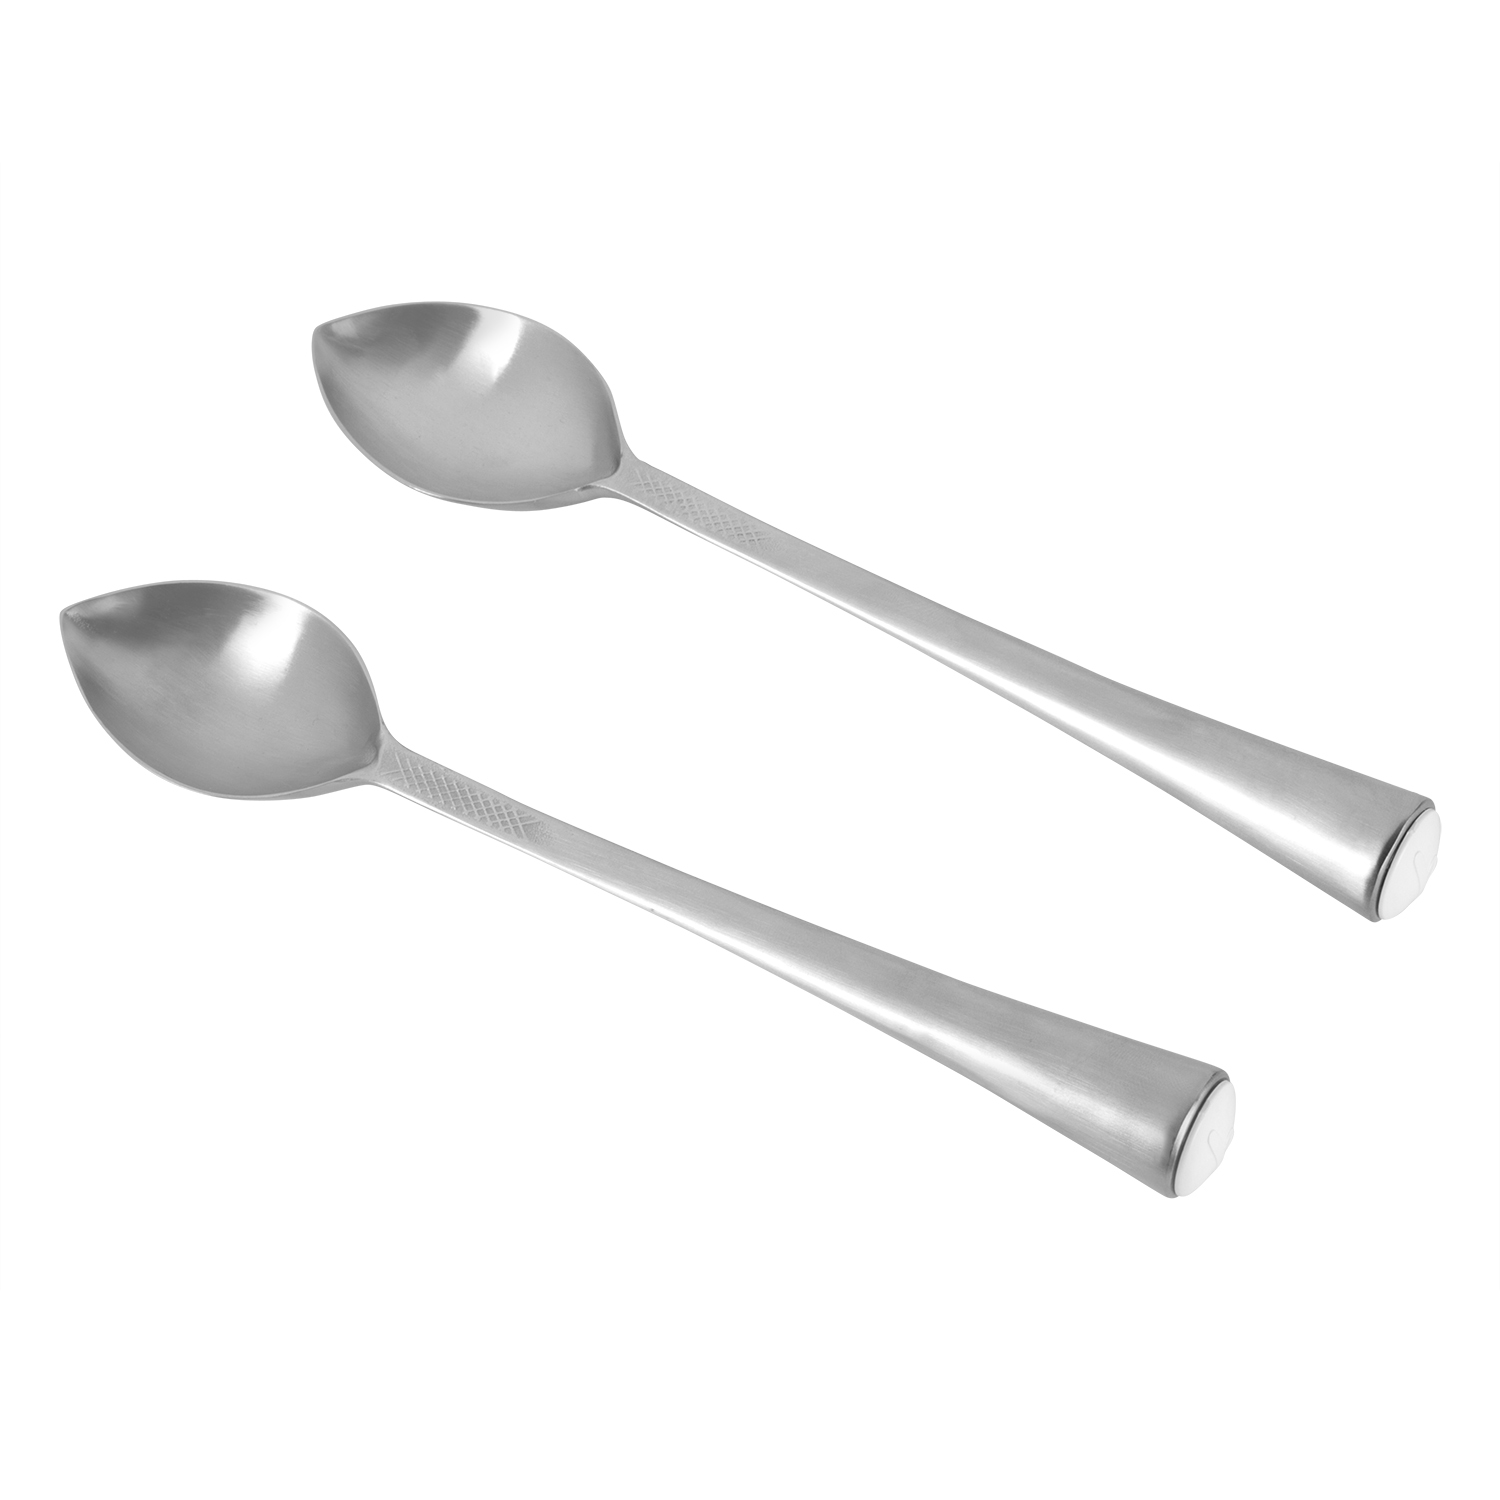 Spherification Spoon Deco Spoon Quenelle Spoon (tbsp size) Quenelle Spoon  (tsp size) For more detail about this product, don't hestitate…